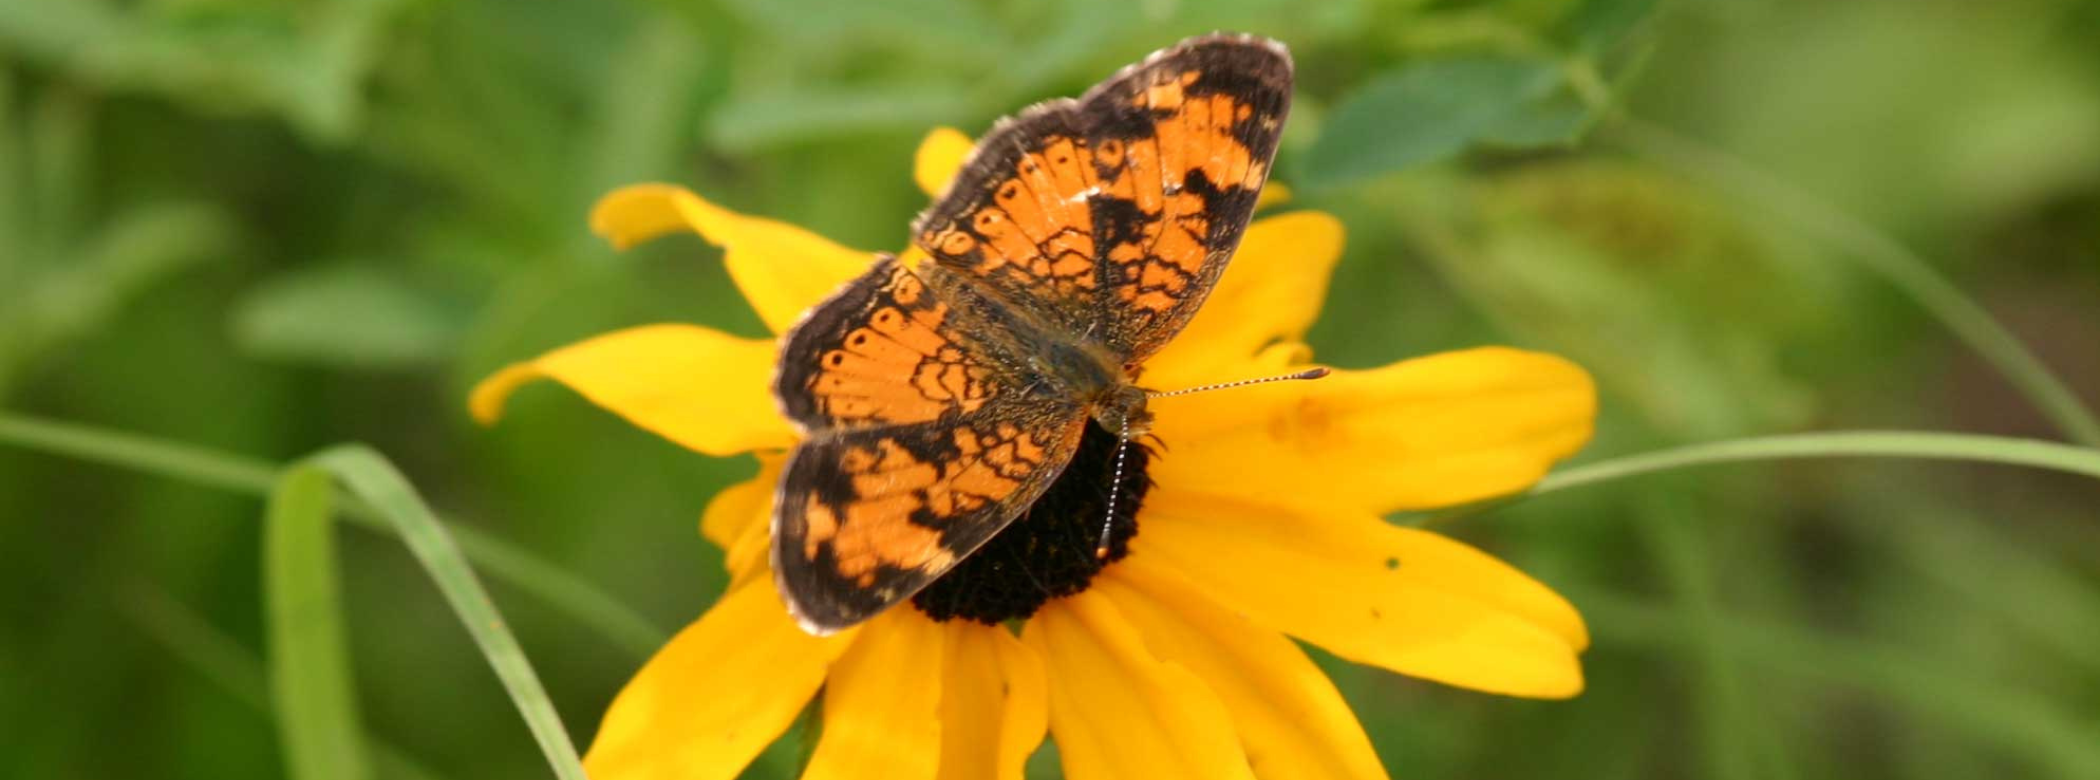 An orange butterfly with dark markings on its wings, perched on a flower with long yellow petals.